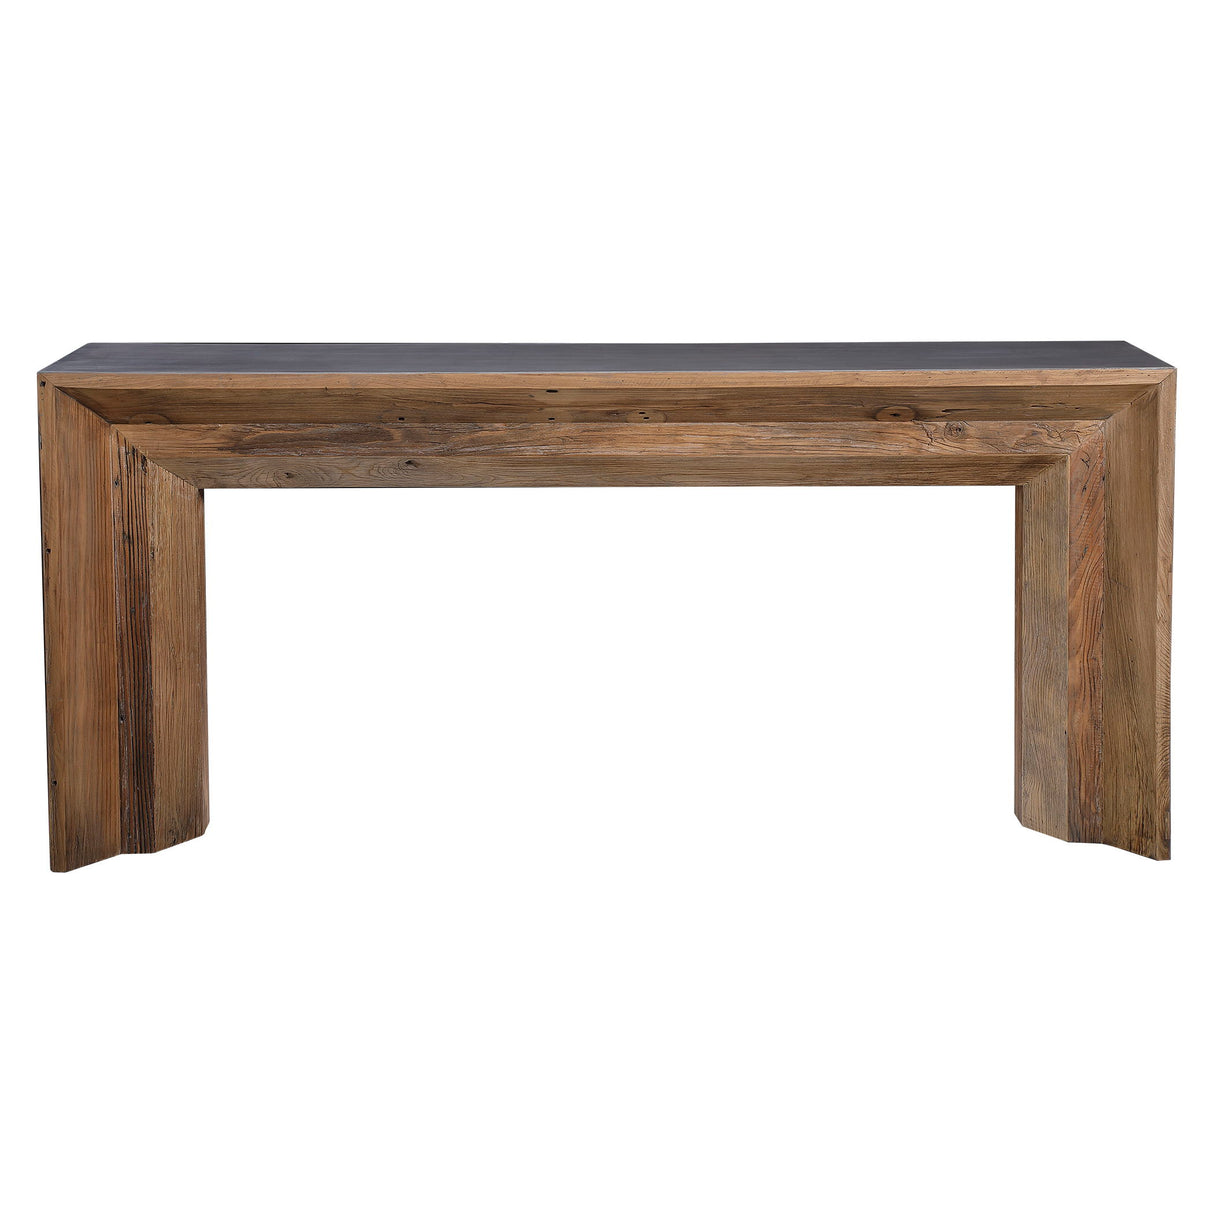 Vail - Reclaimed Wood Console Table - Brown, Dark